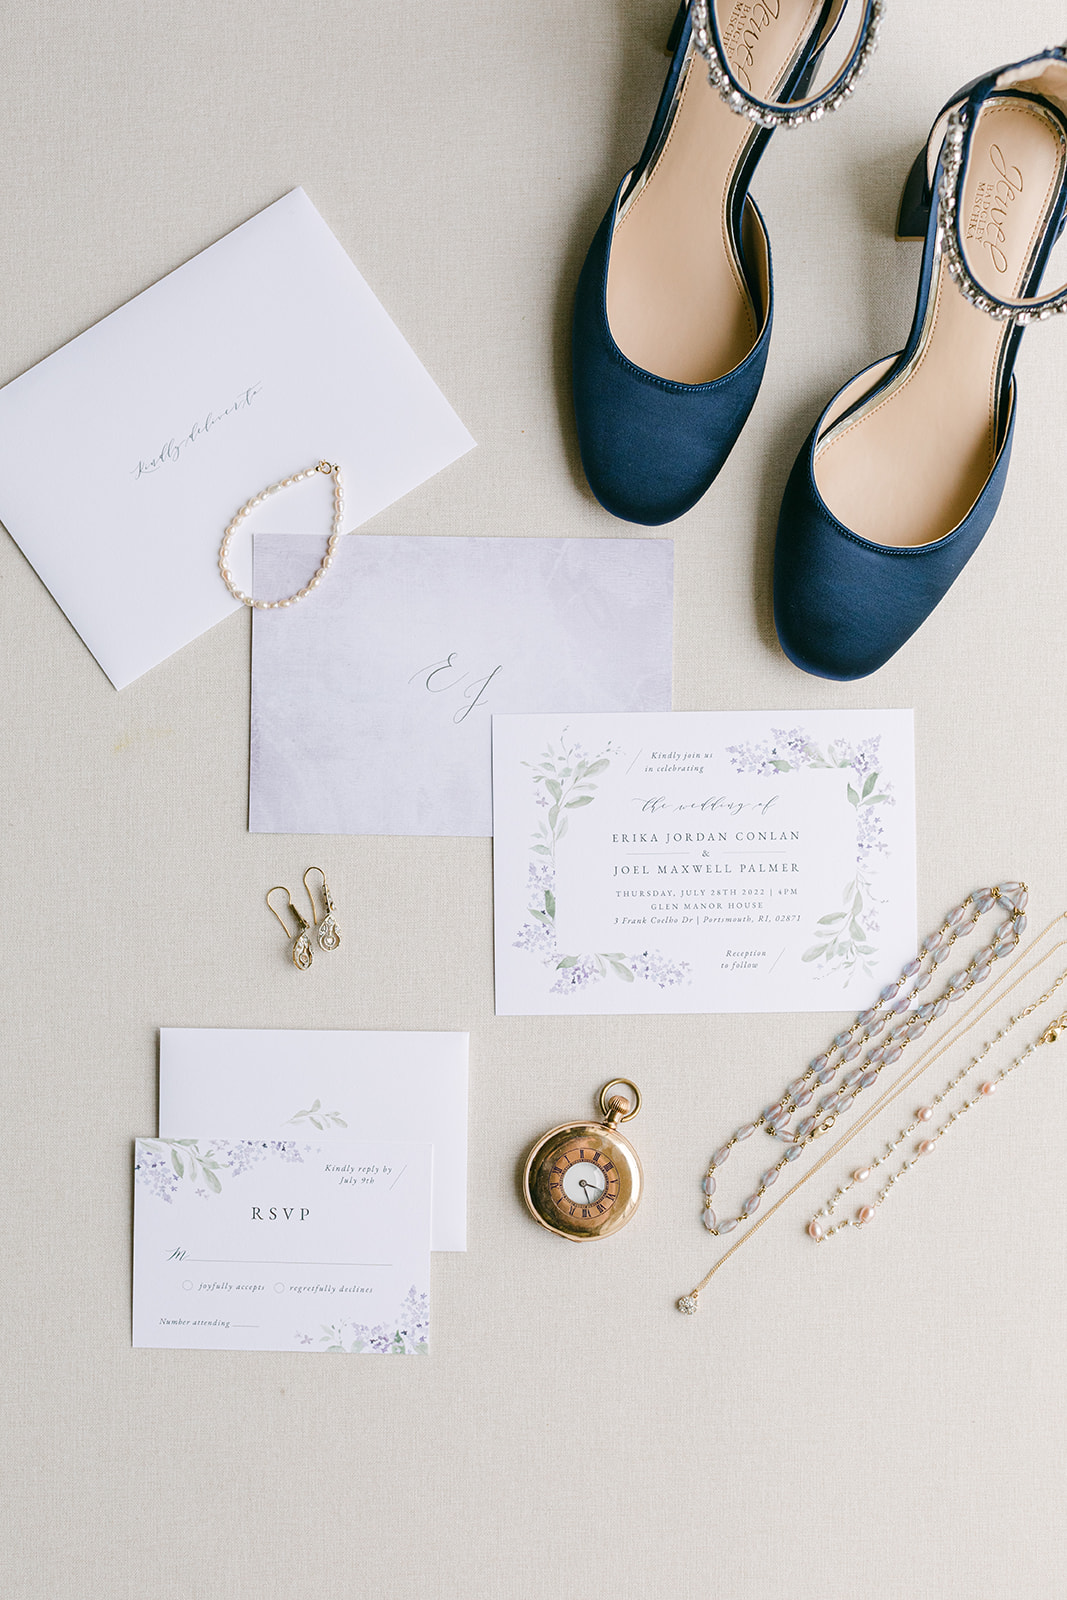 wedding day flat lay details at glen manor house